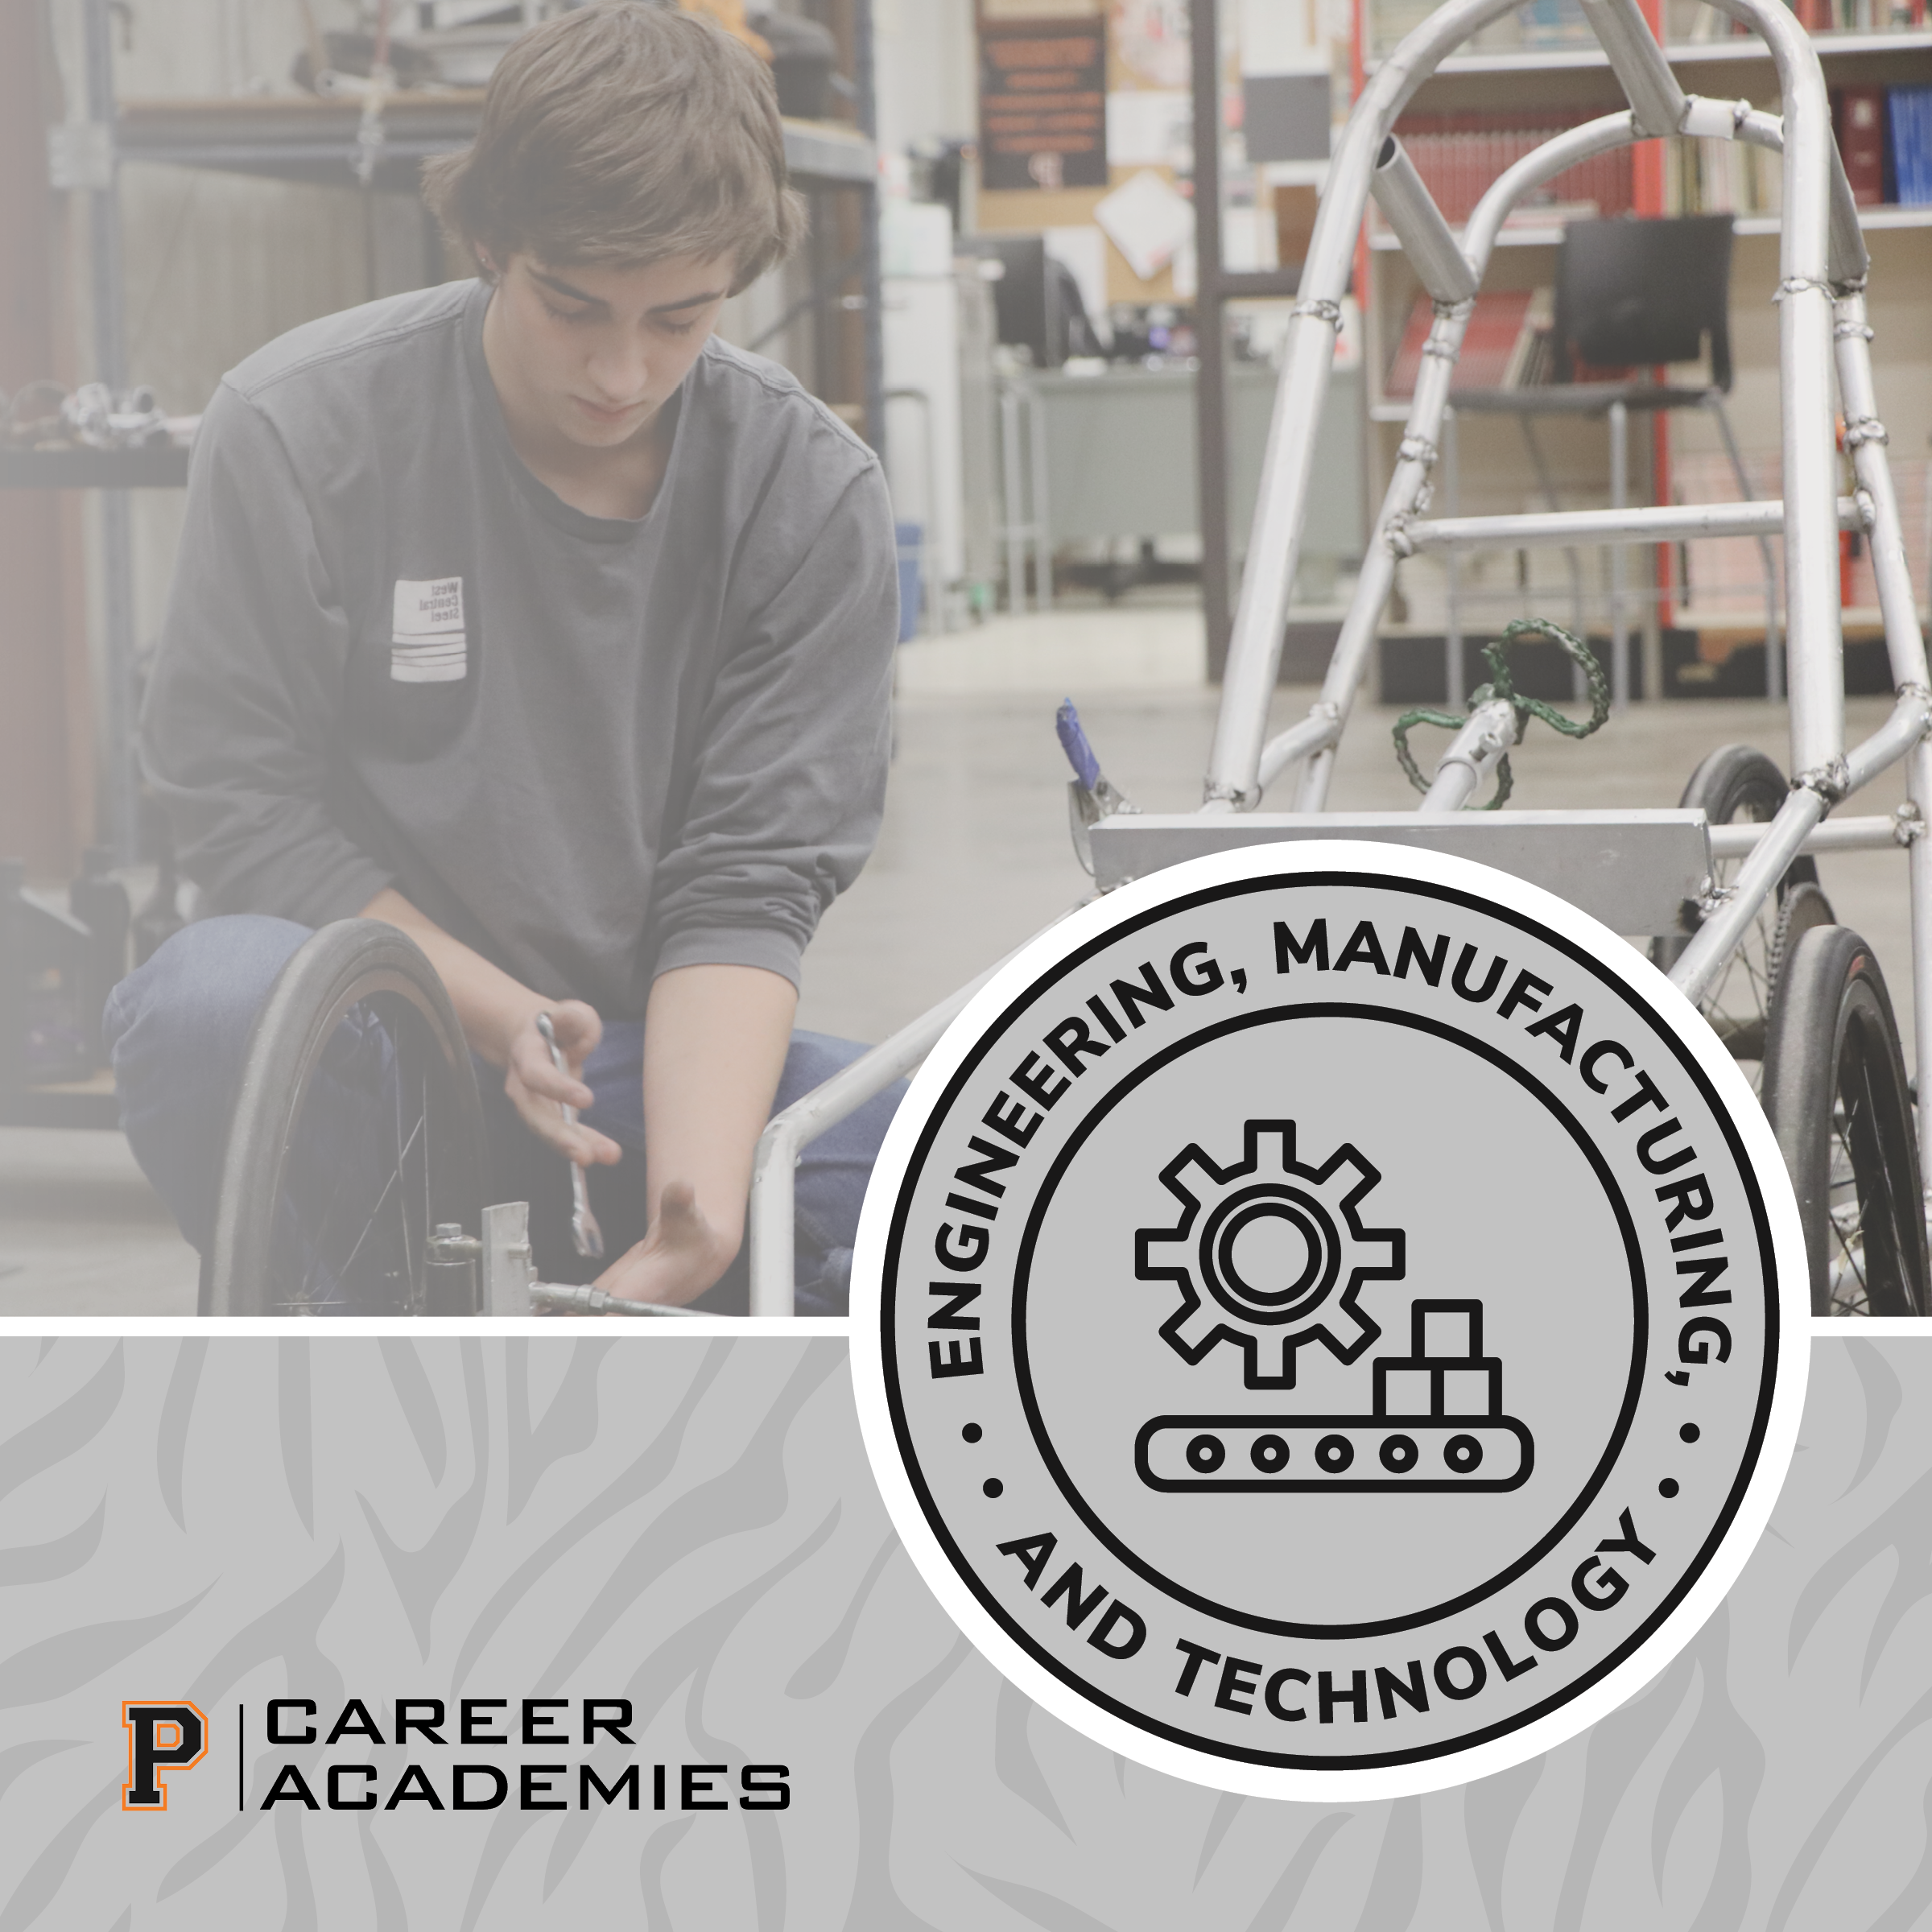 p career academies engineering, manufacturing and technology